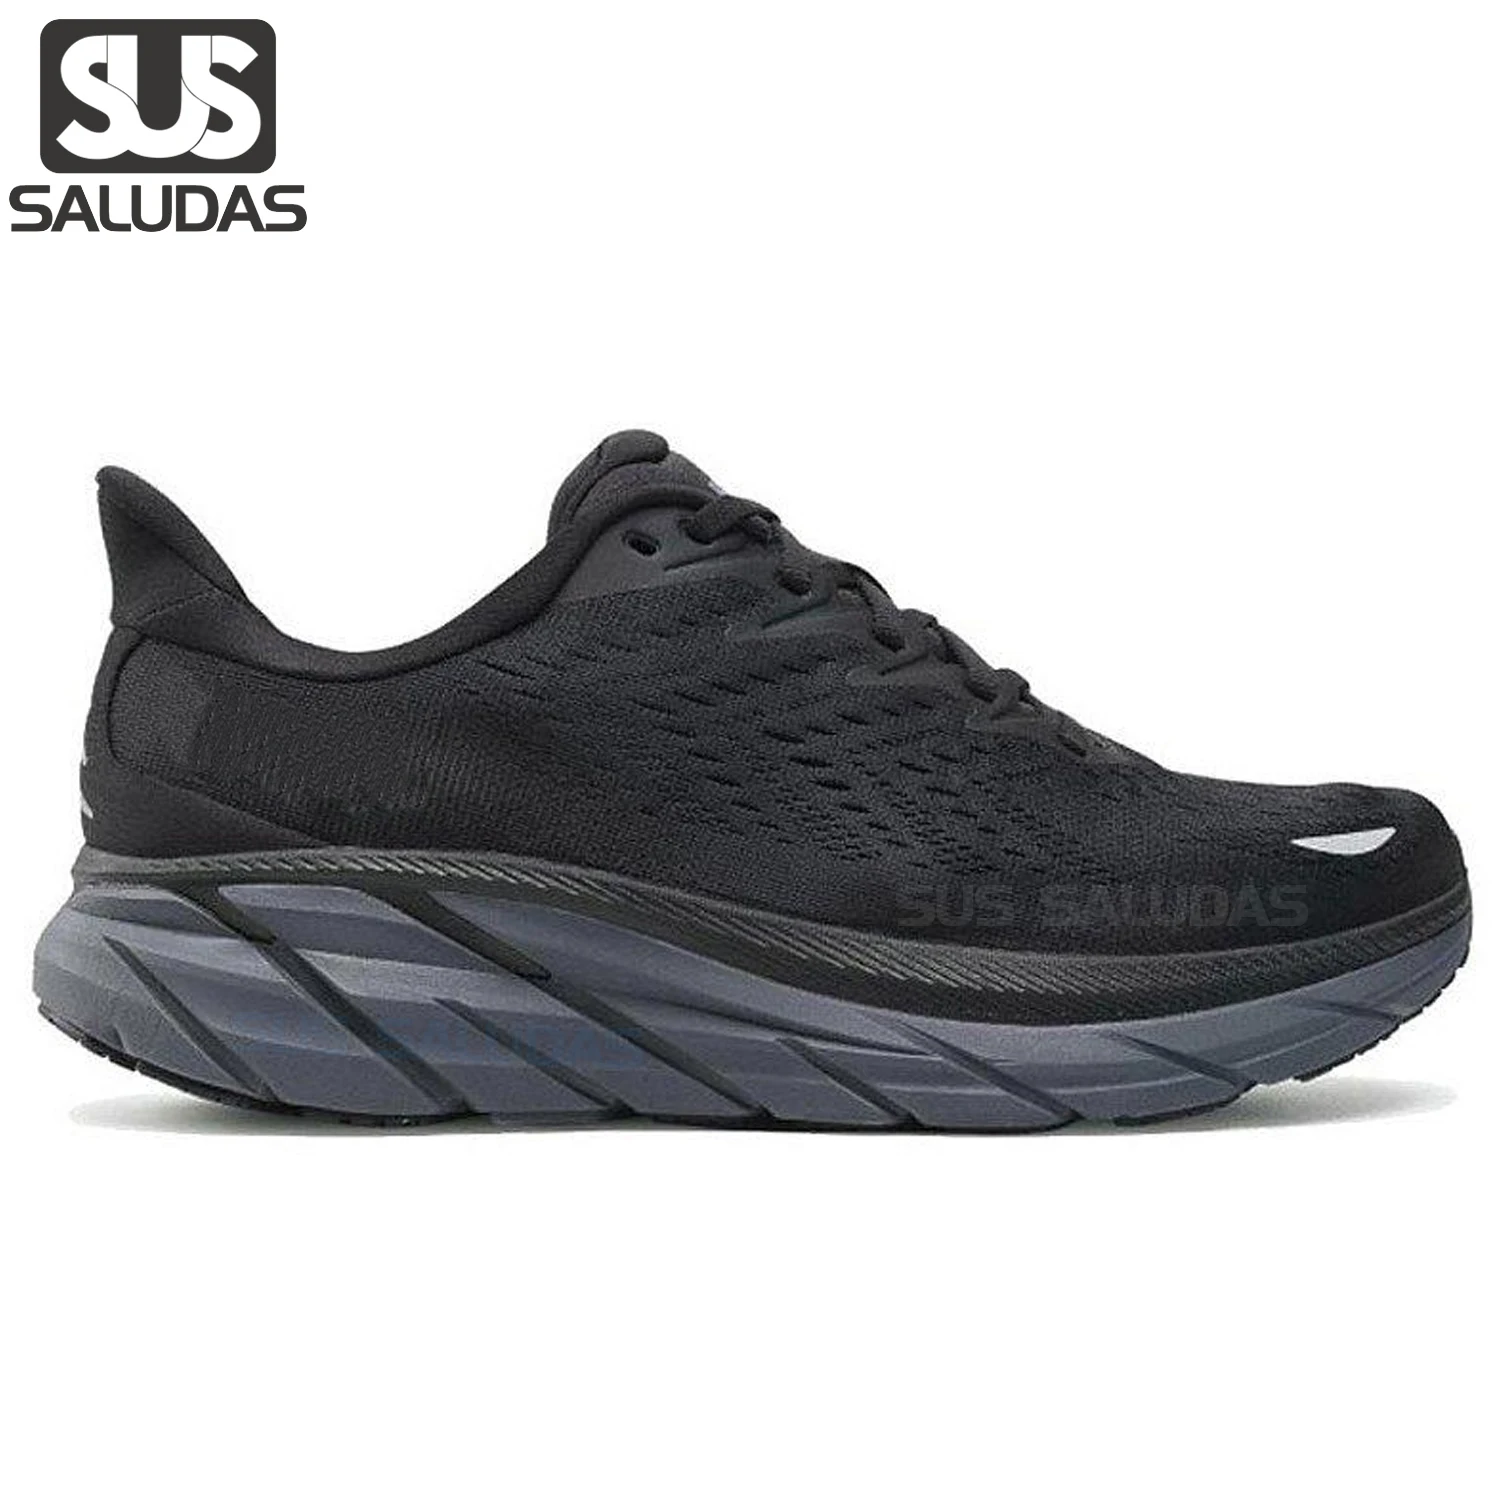 

SALUDAS Men Athletic Running Shoes Outdoor Breathable Slip on Sneakers Fashion Walking Shoes Workout Gym Sports Shoes for Women